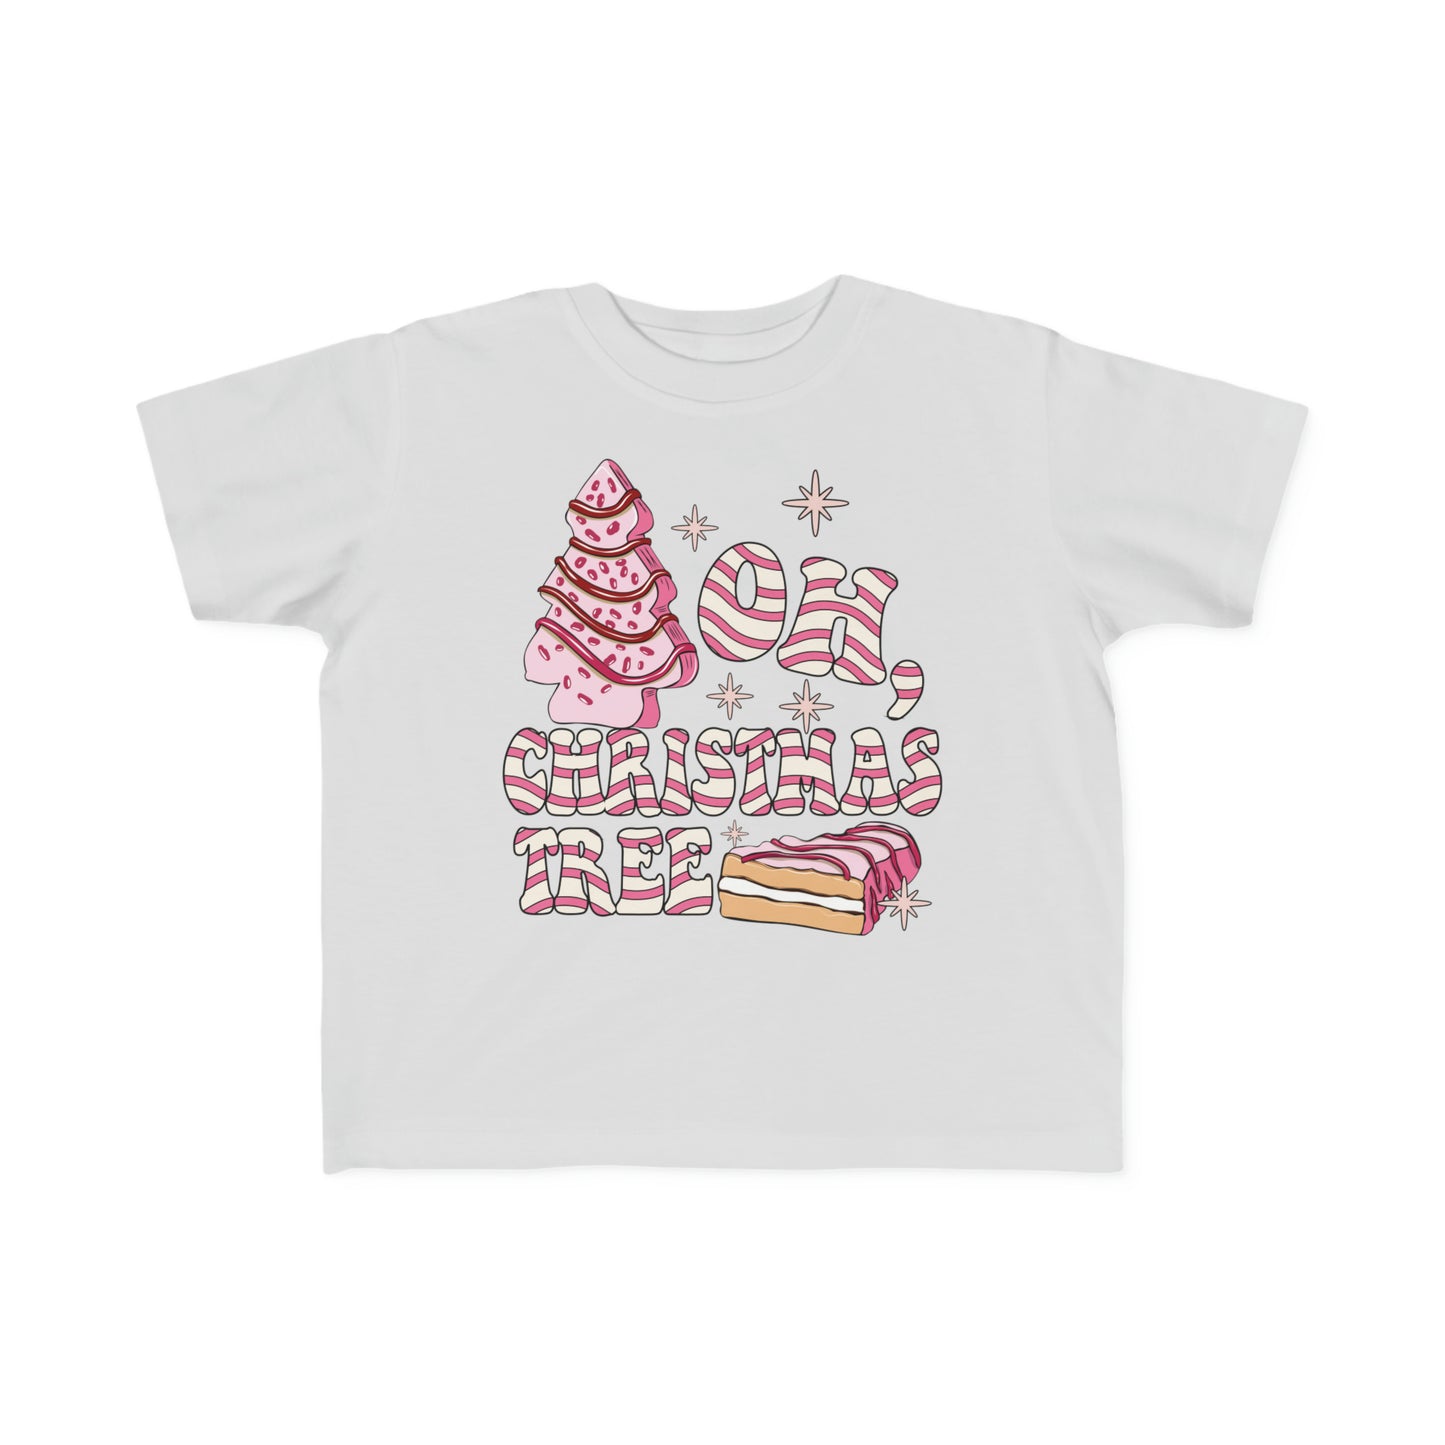 Oh, Christmas Tree Toddler's Fine Jersey Tee